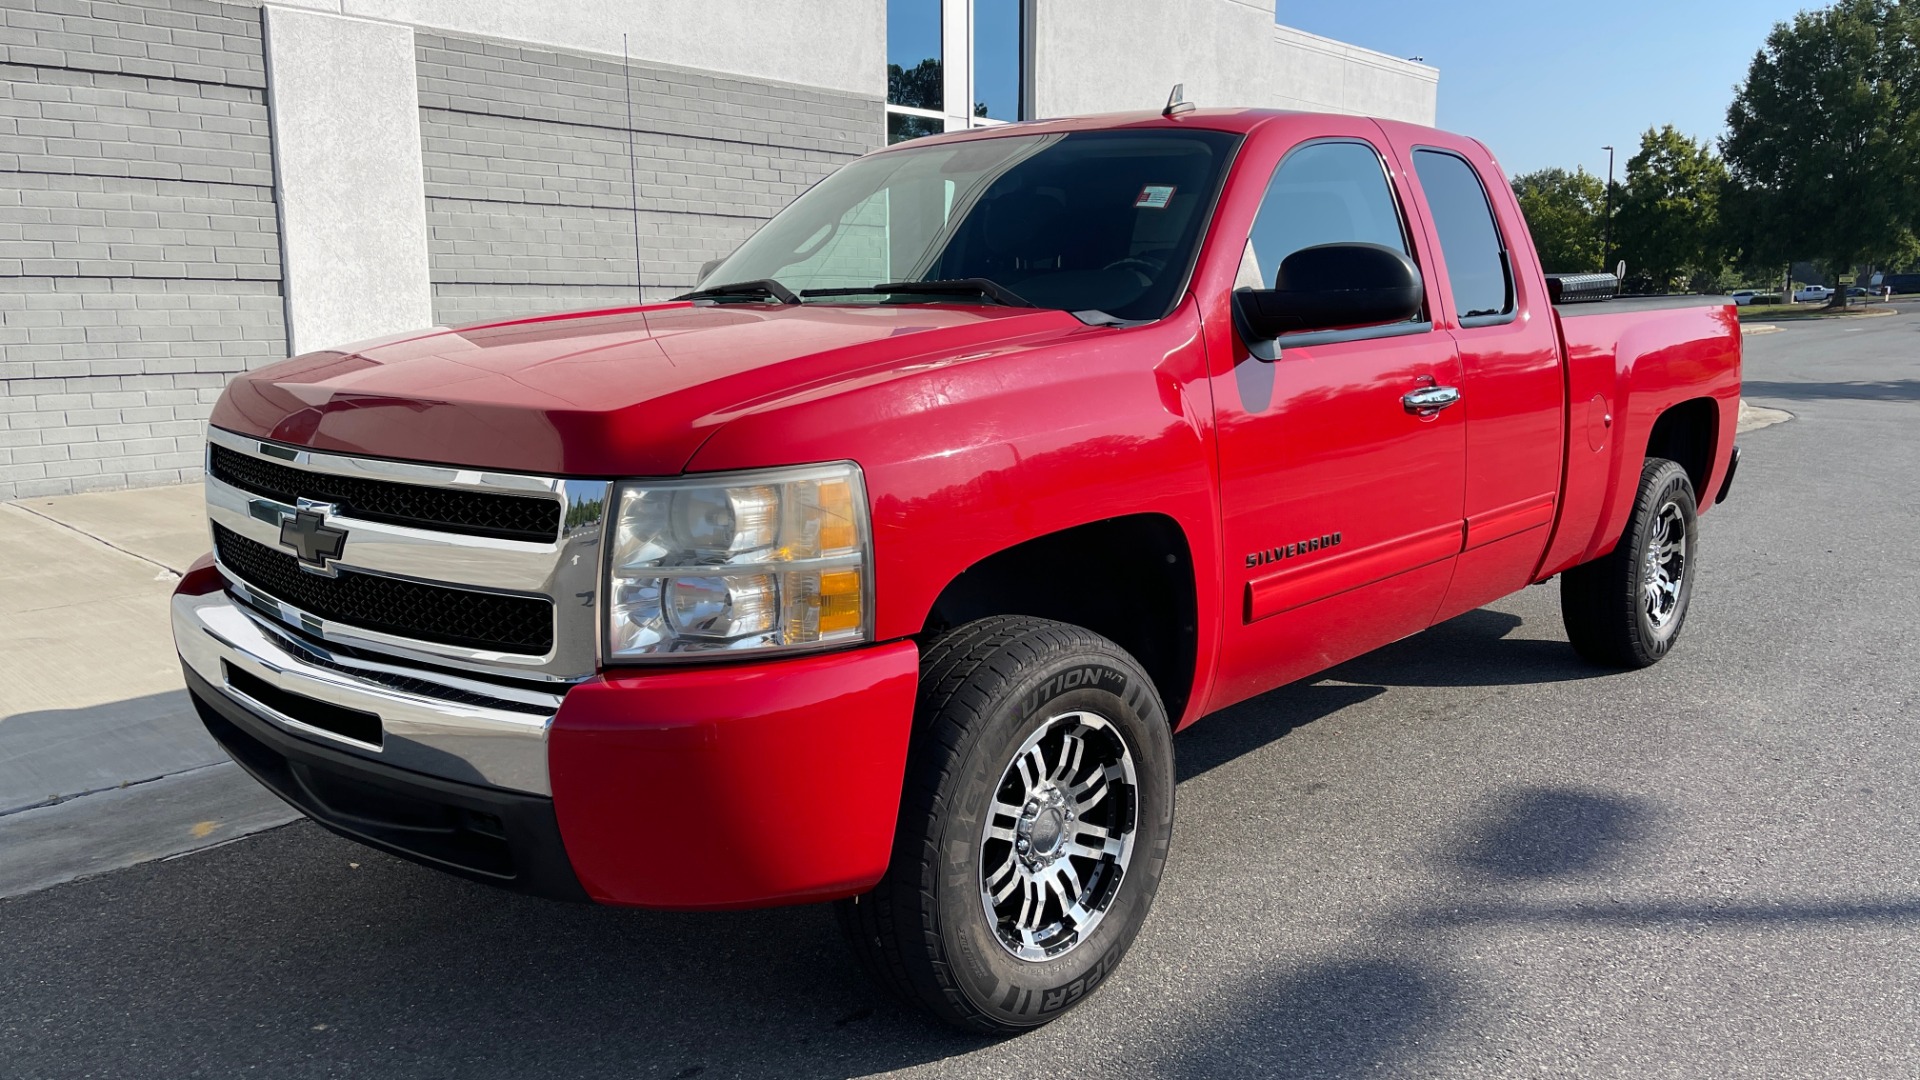 Used 2010 Chevrolet SILVERADO 1500 LT EXT CAB / 2WD / 5.3L V8 / AUTO / POWER PACK PLUS / TOWING for sale Sold at Formula Imports in Charlotte NC 28227 2